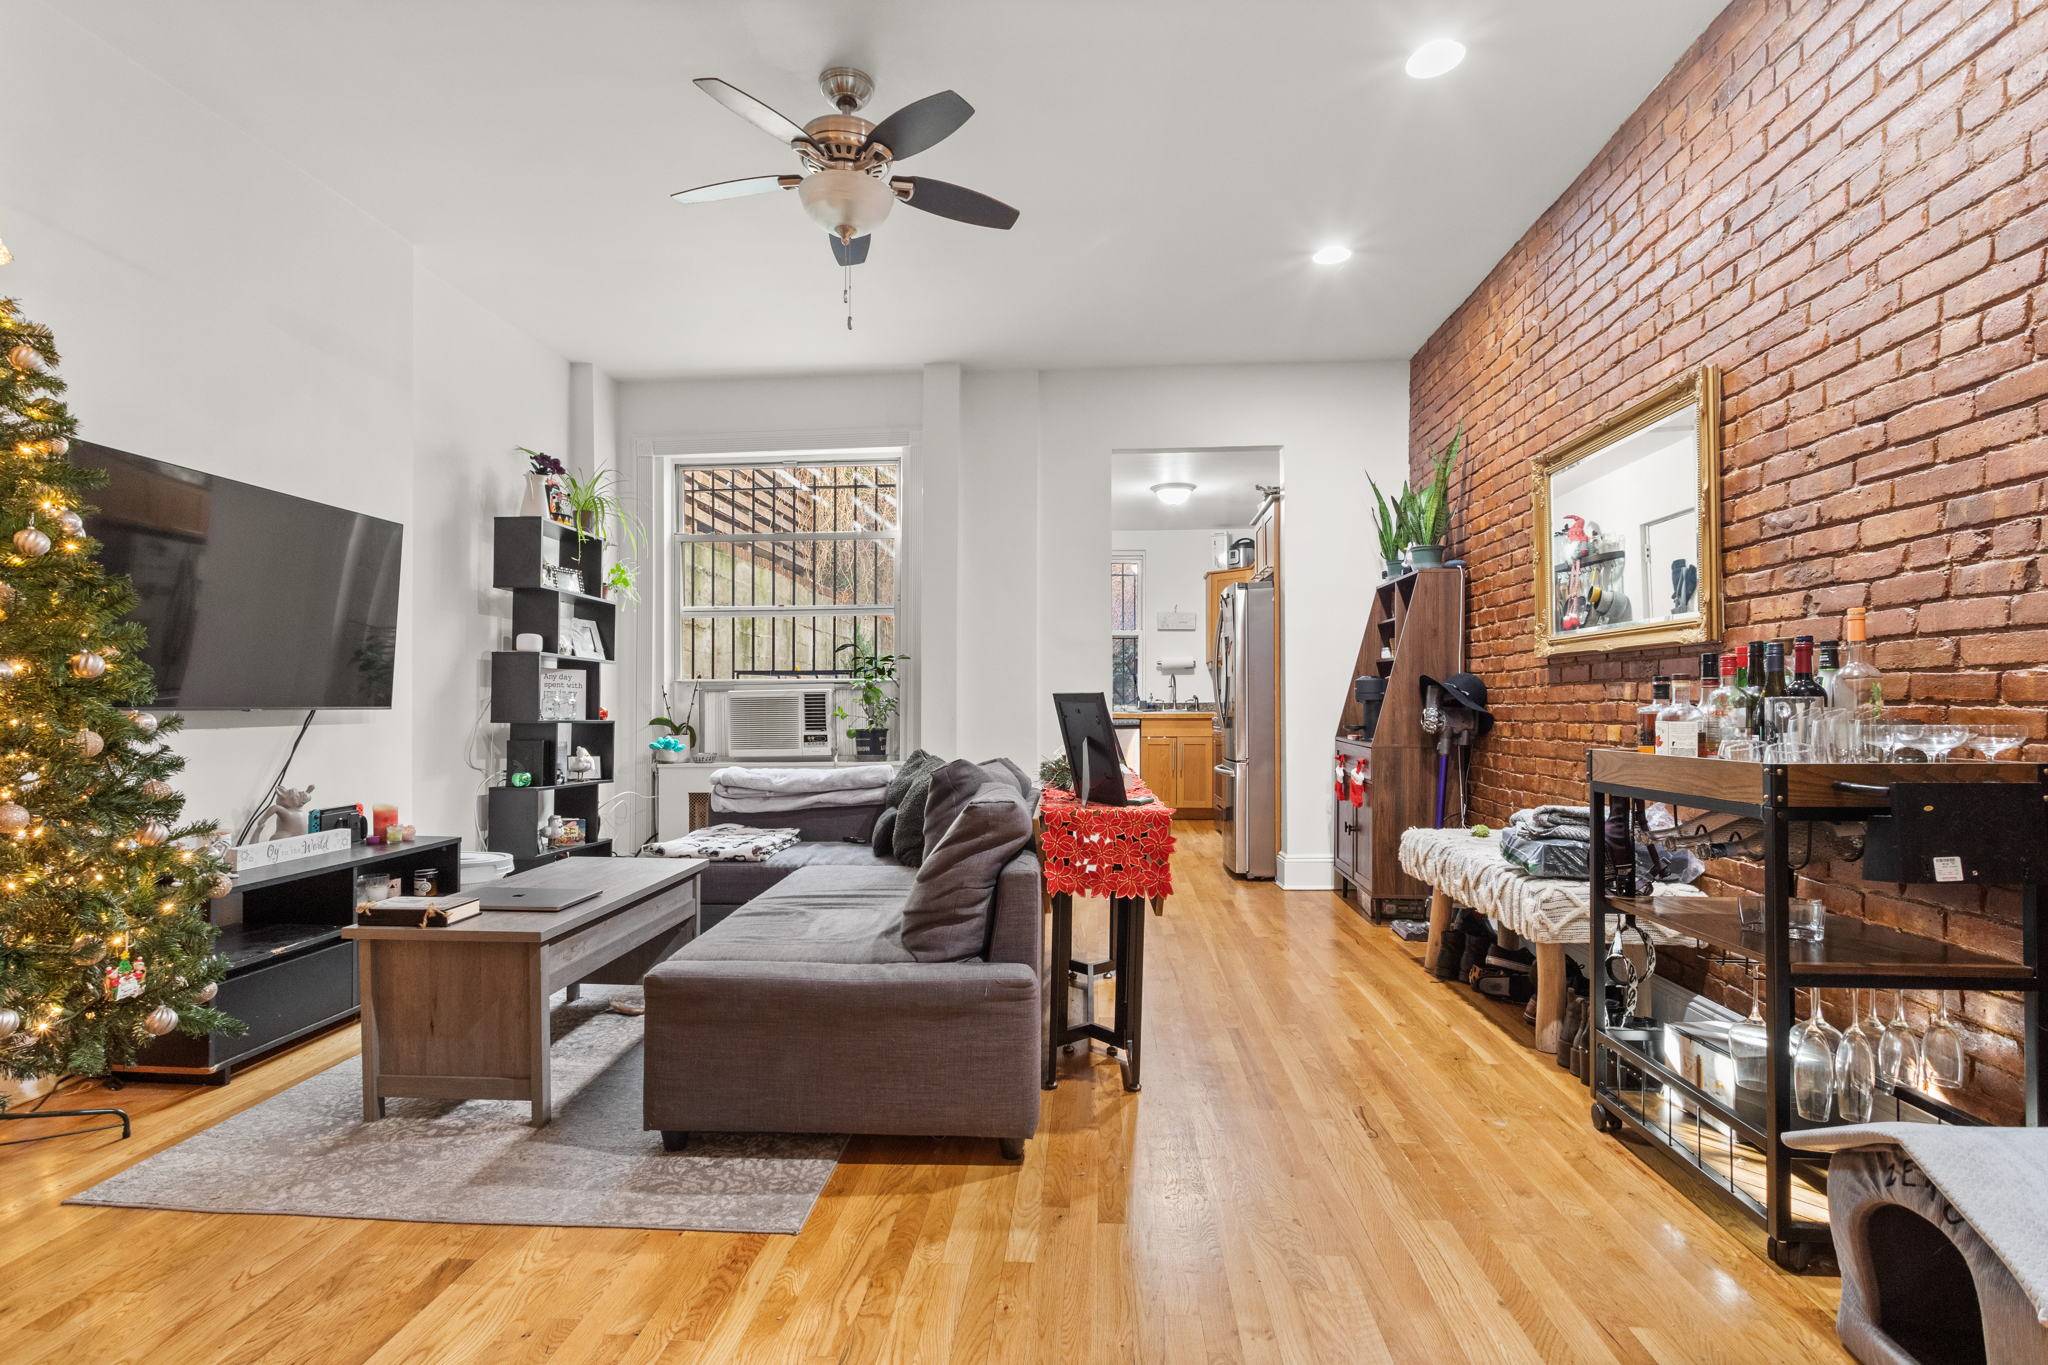 Freshly Gut Renovation ! Exposed Brick Detail, Fresh hardwood floors, Faux fire place, Modern Kitchen with Stainless Steel Appliances, Sun Bright Double Pane Windows, Ceiling Fan, True Spaced Closet, Vaulted ...